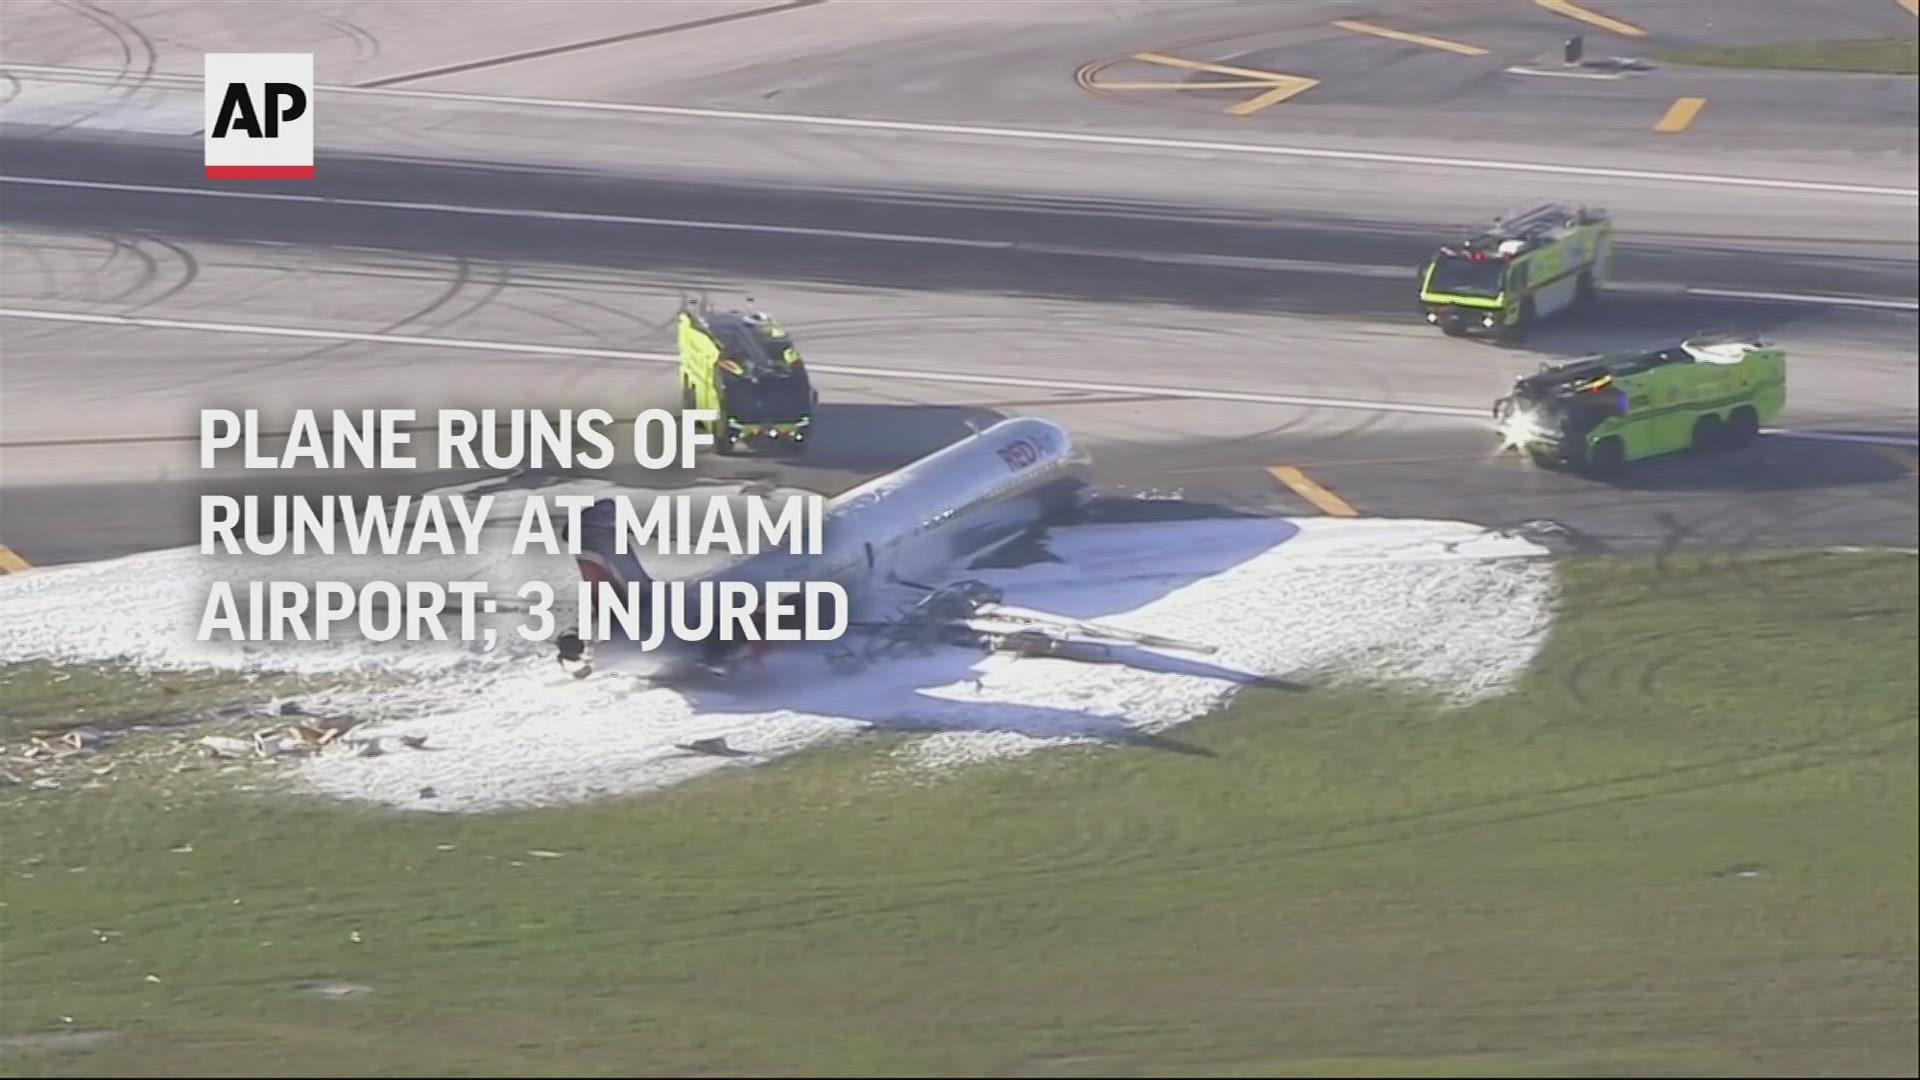 Officials say a passenger airplane caught fire after landing at Miami International Airport, though no serious injuries were reported.